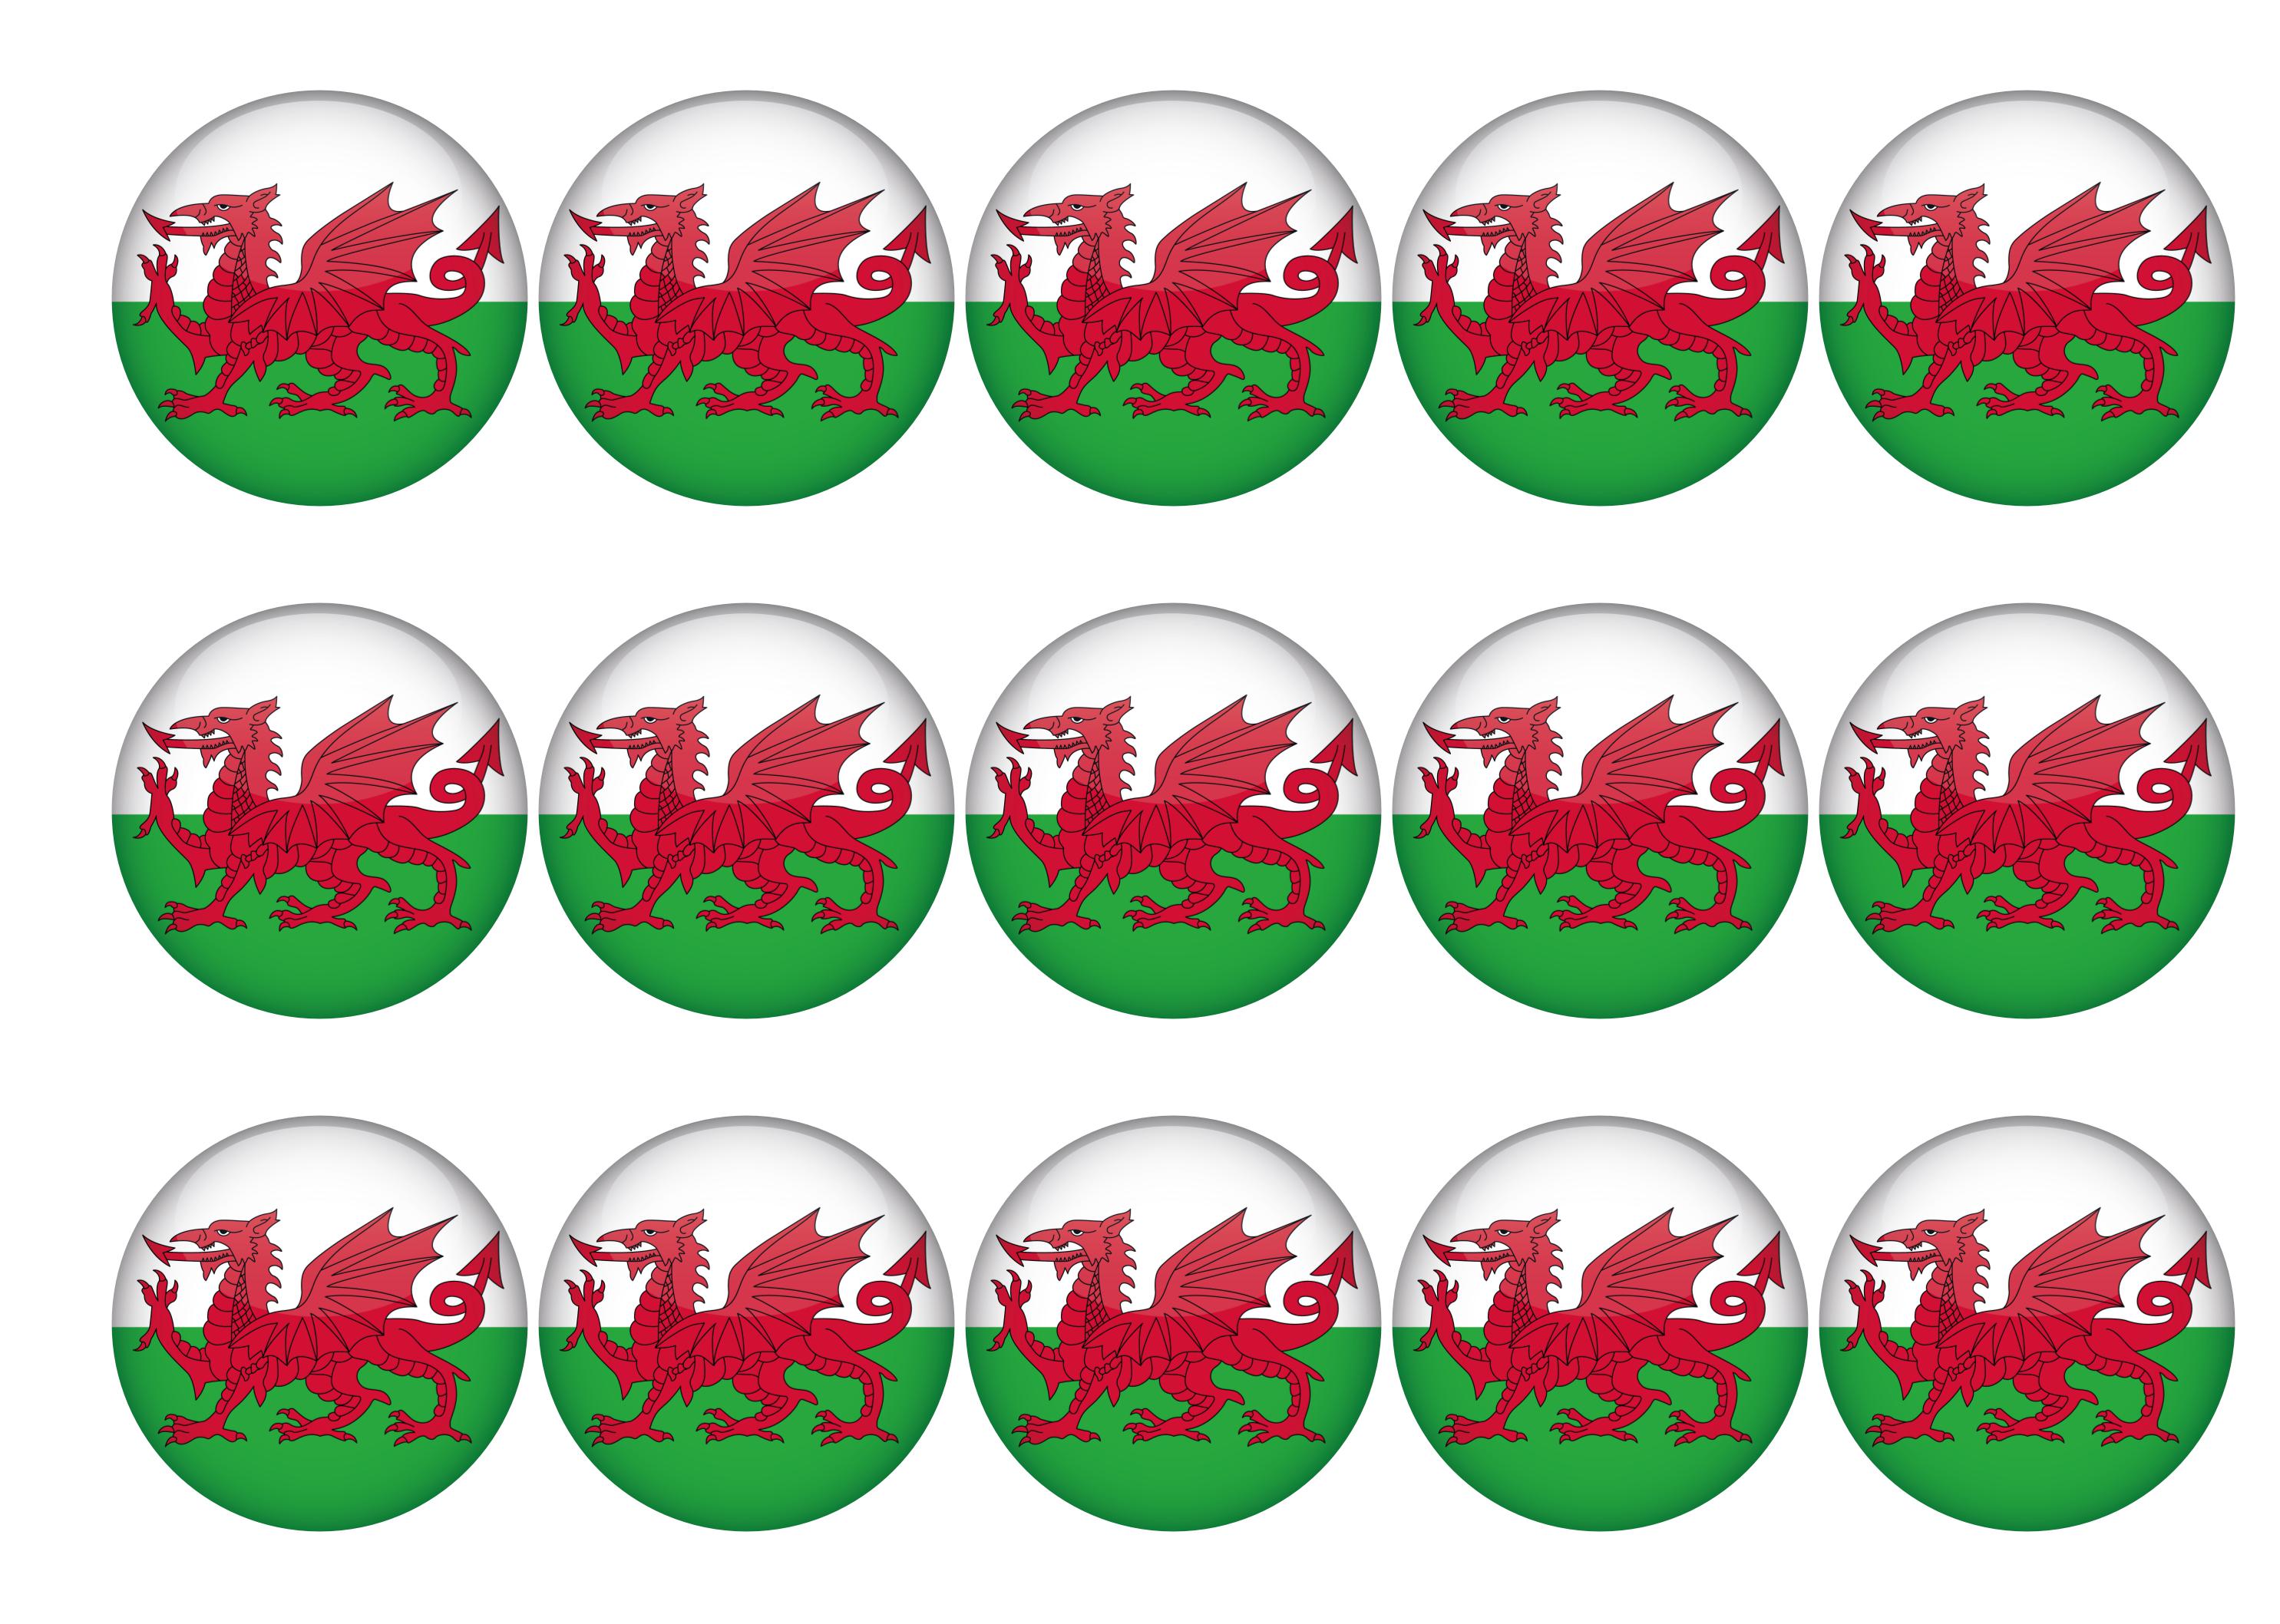 15 toppers with the Welsh flag